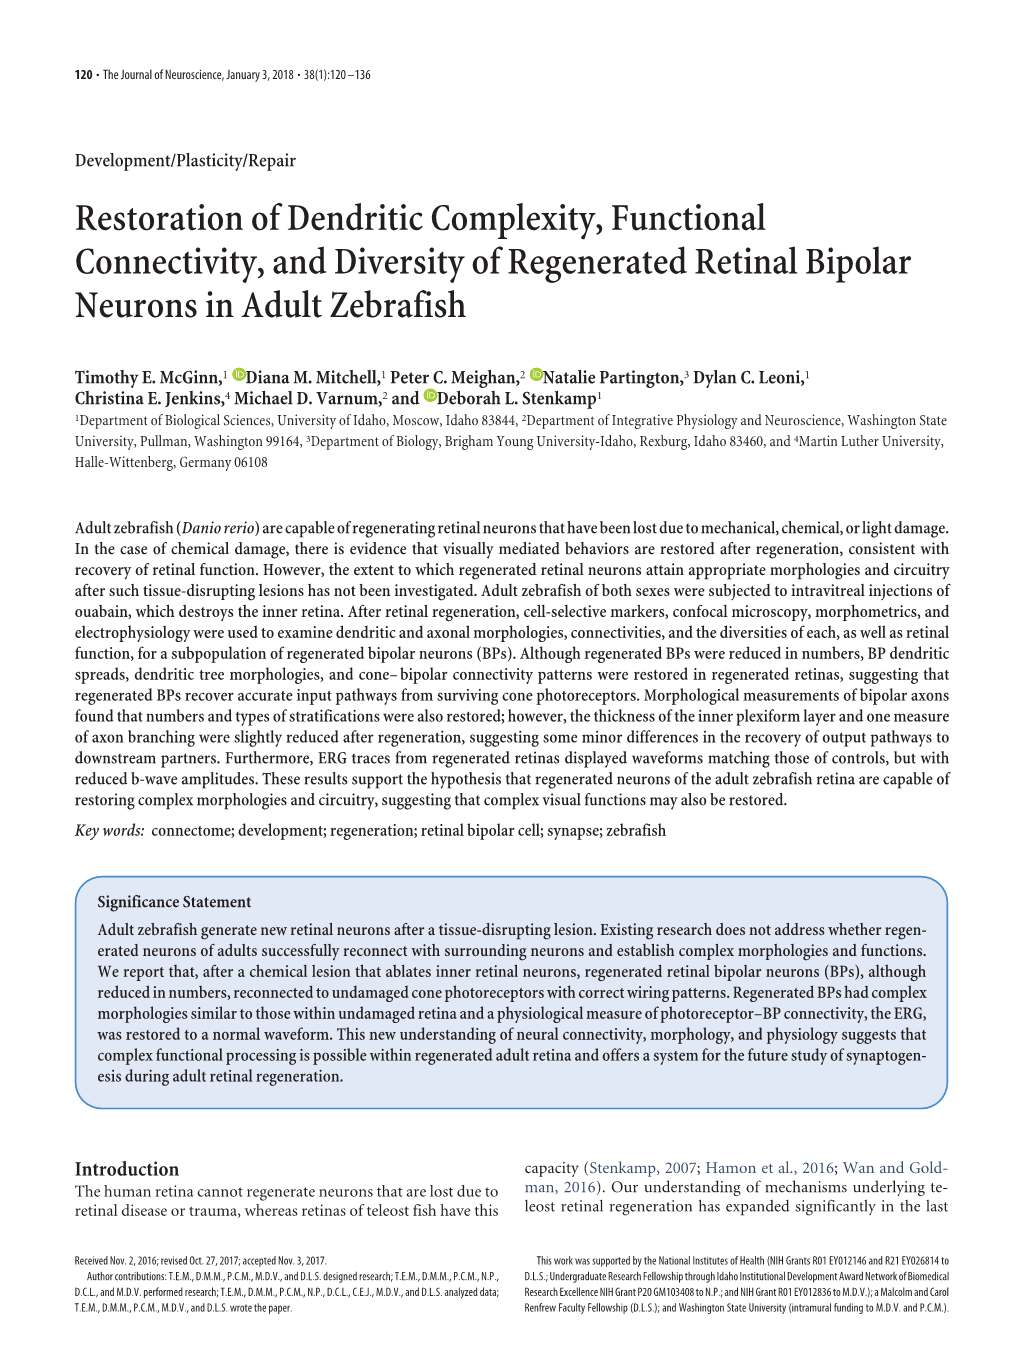 Restoration of Dendritic Complexity, Functional Connectivity, and Diversity of Regenerated Retinal Bipolar Neurons in Adult Zebrafish